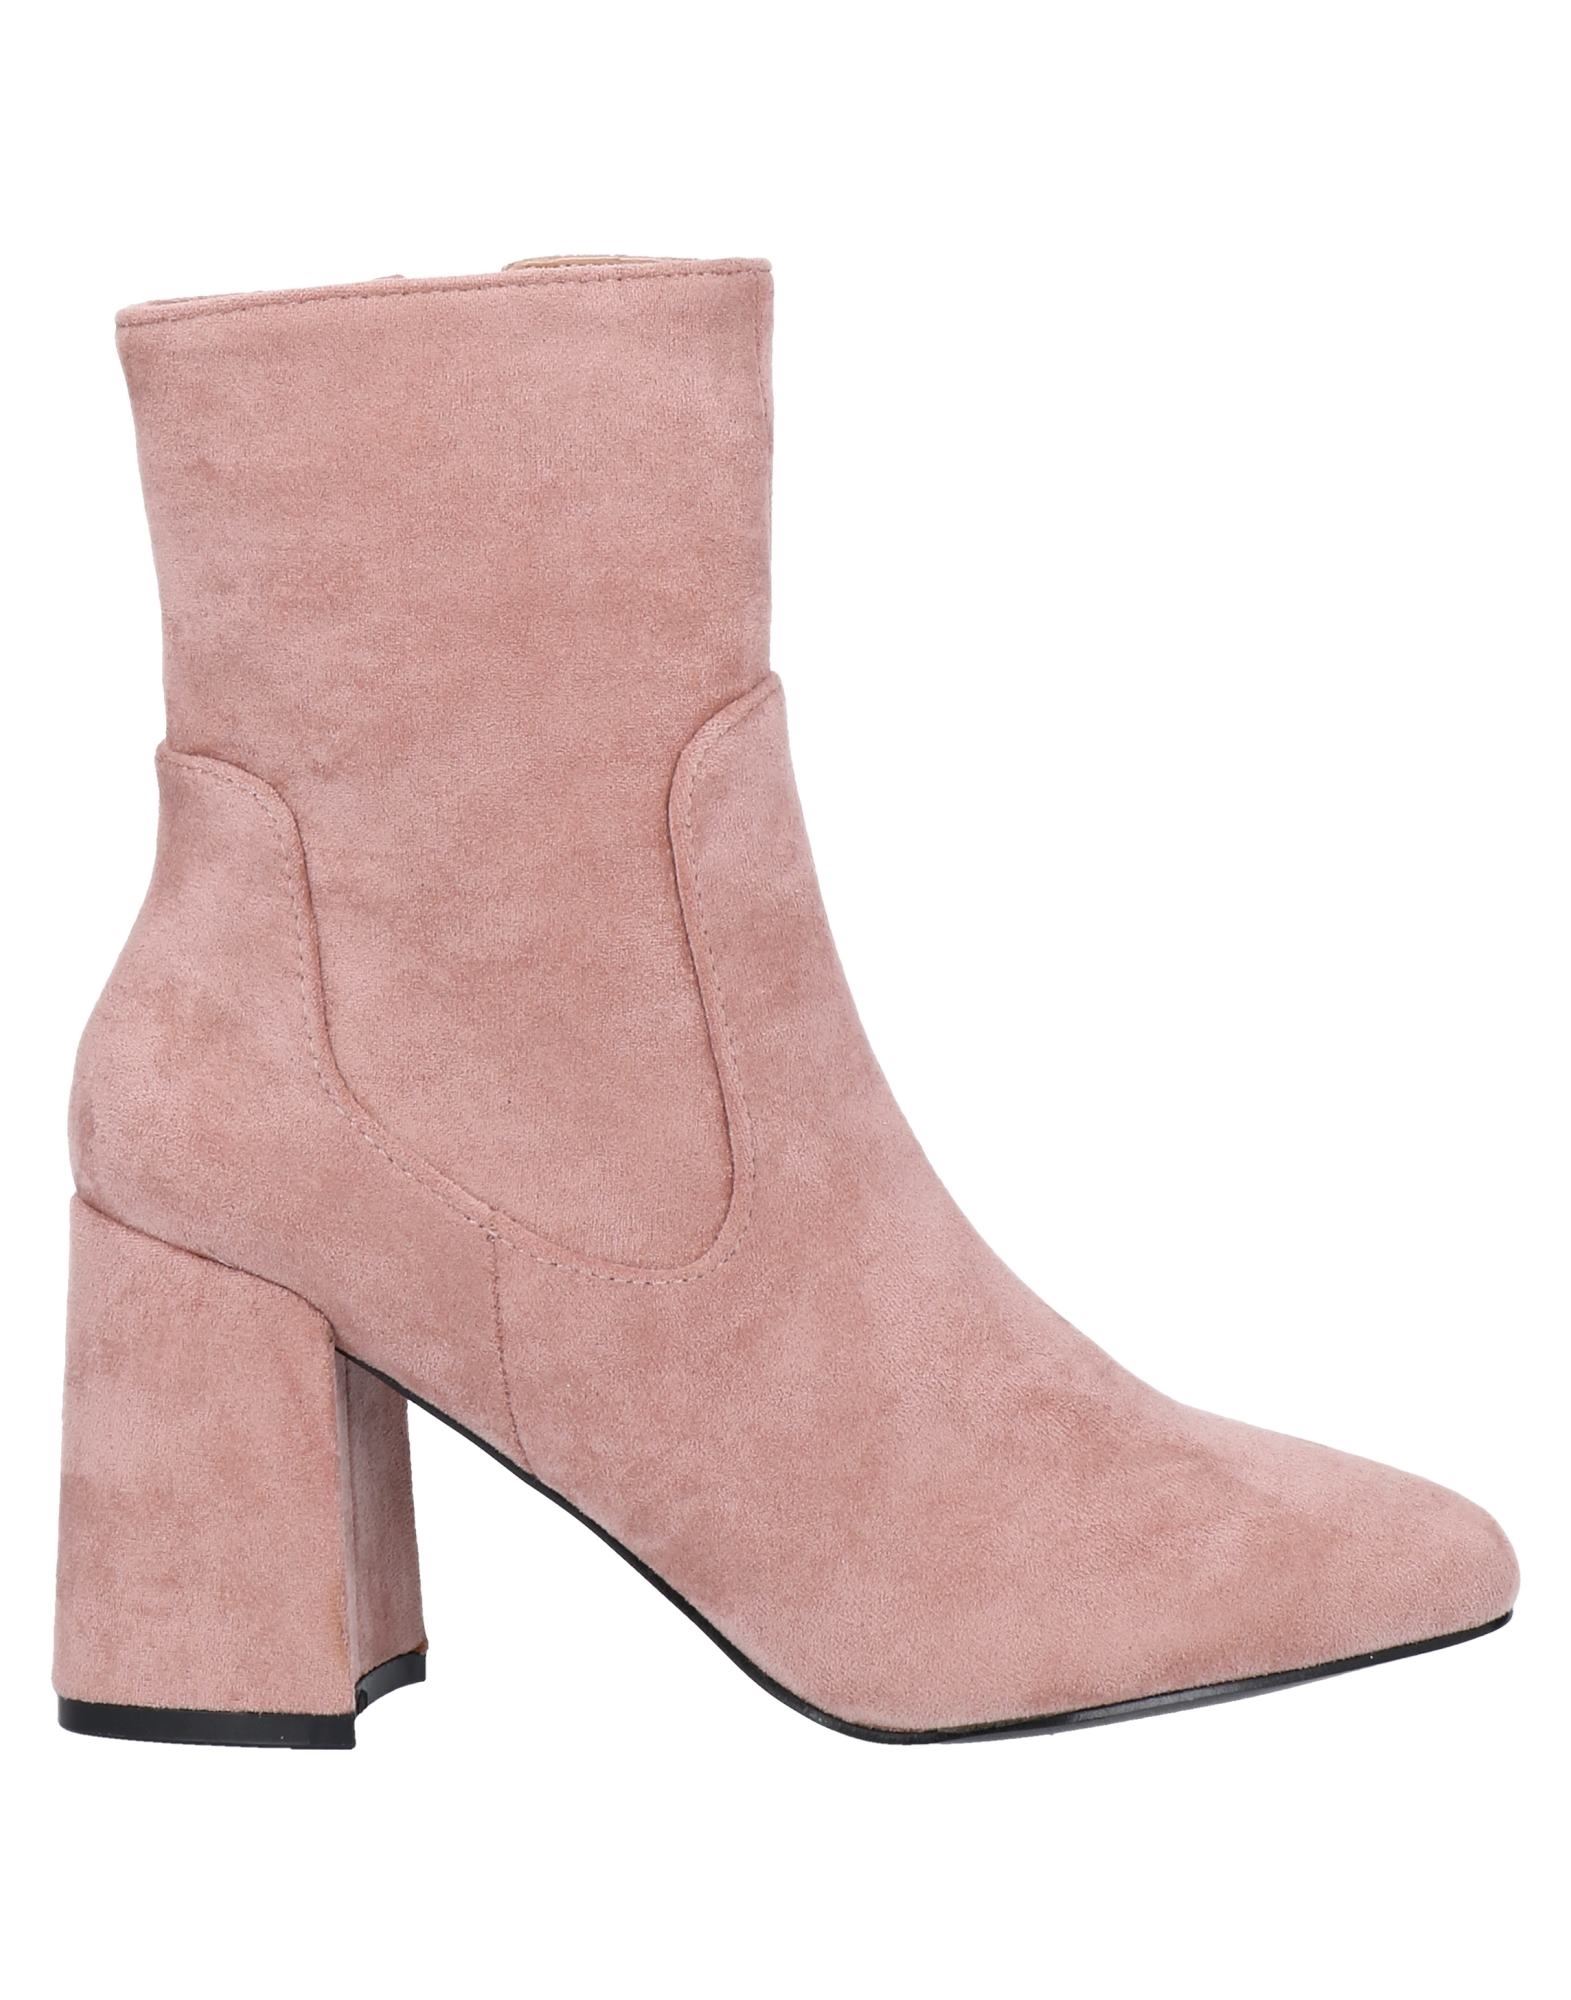 Sexy Woman Ankle Boots In Pastel Pink